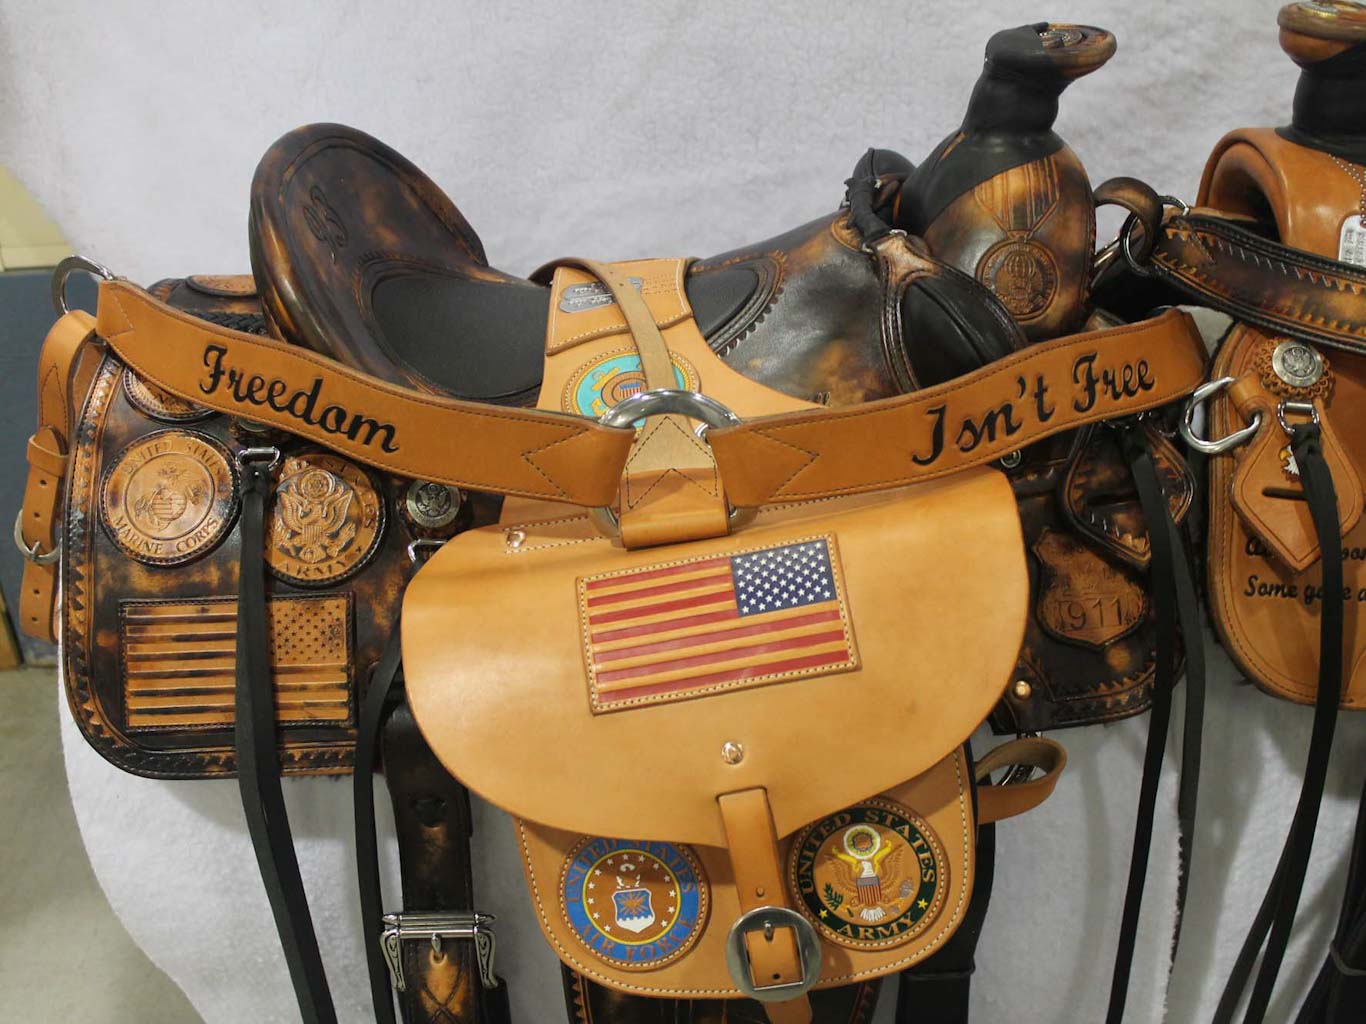 Custom 9/11 Saddle with military, police, and fire insignia